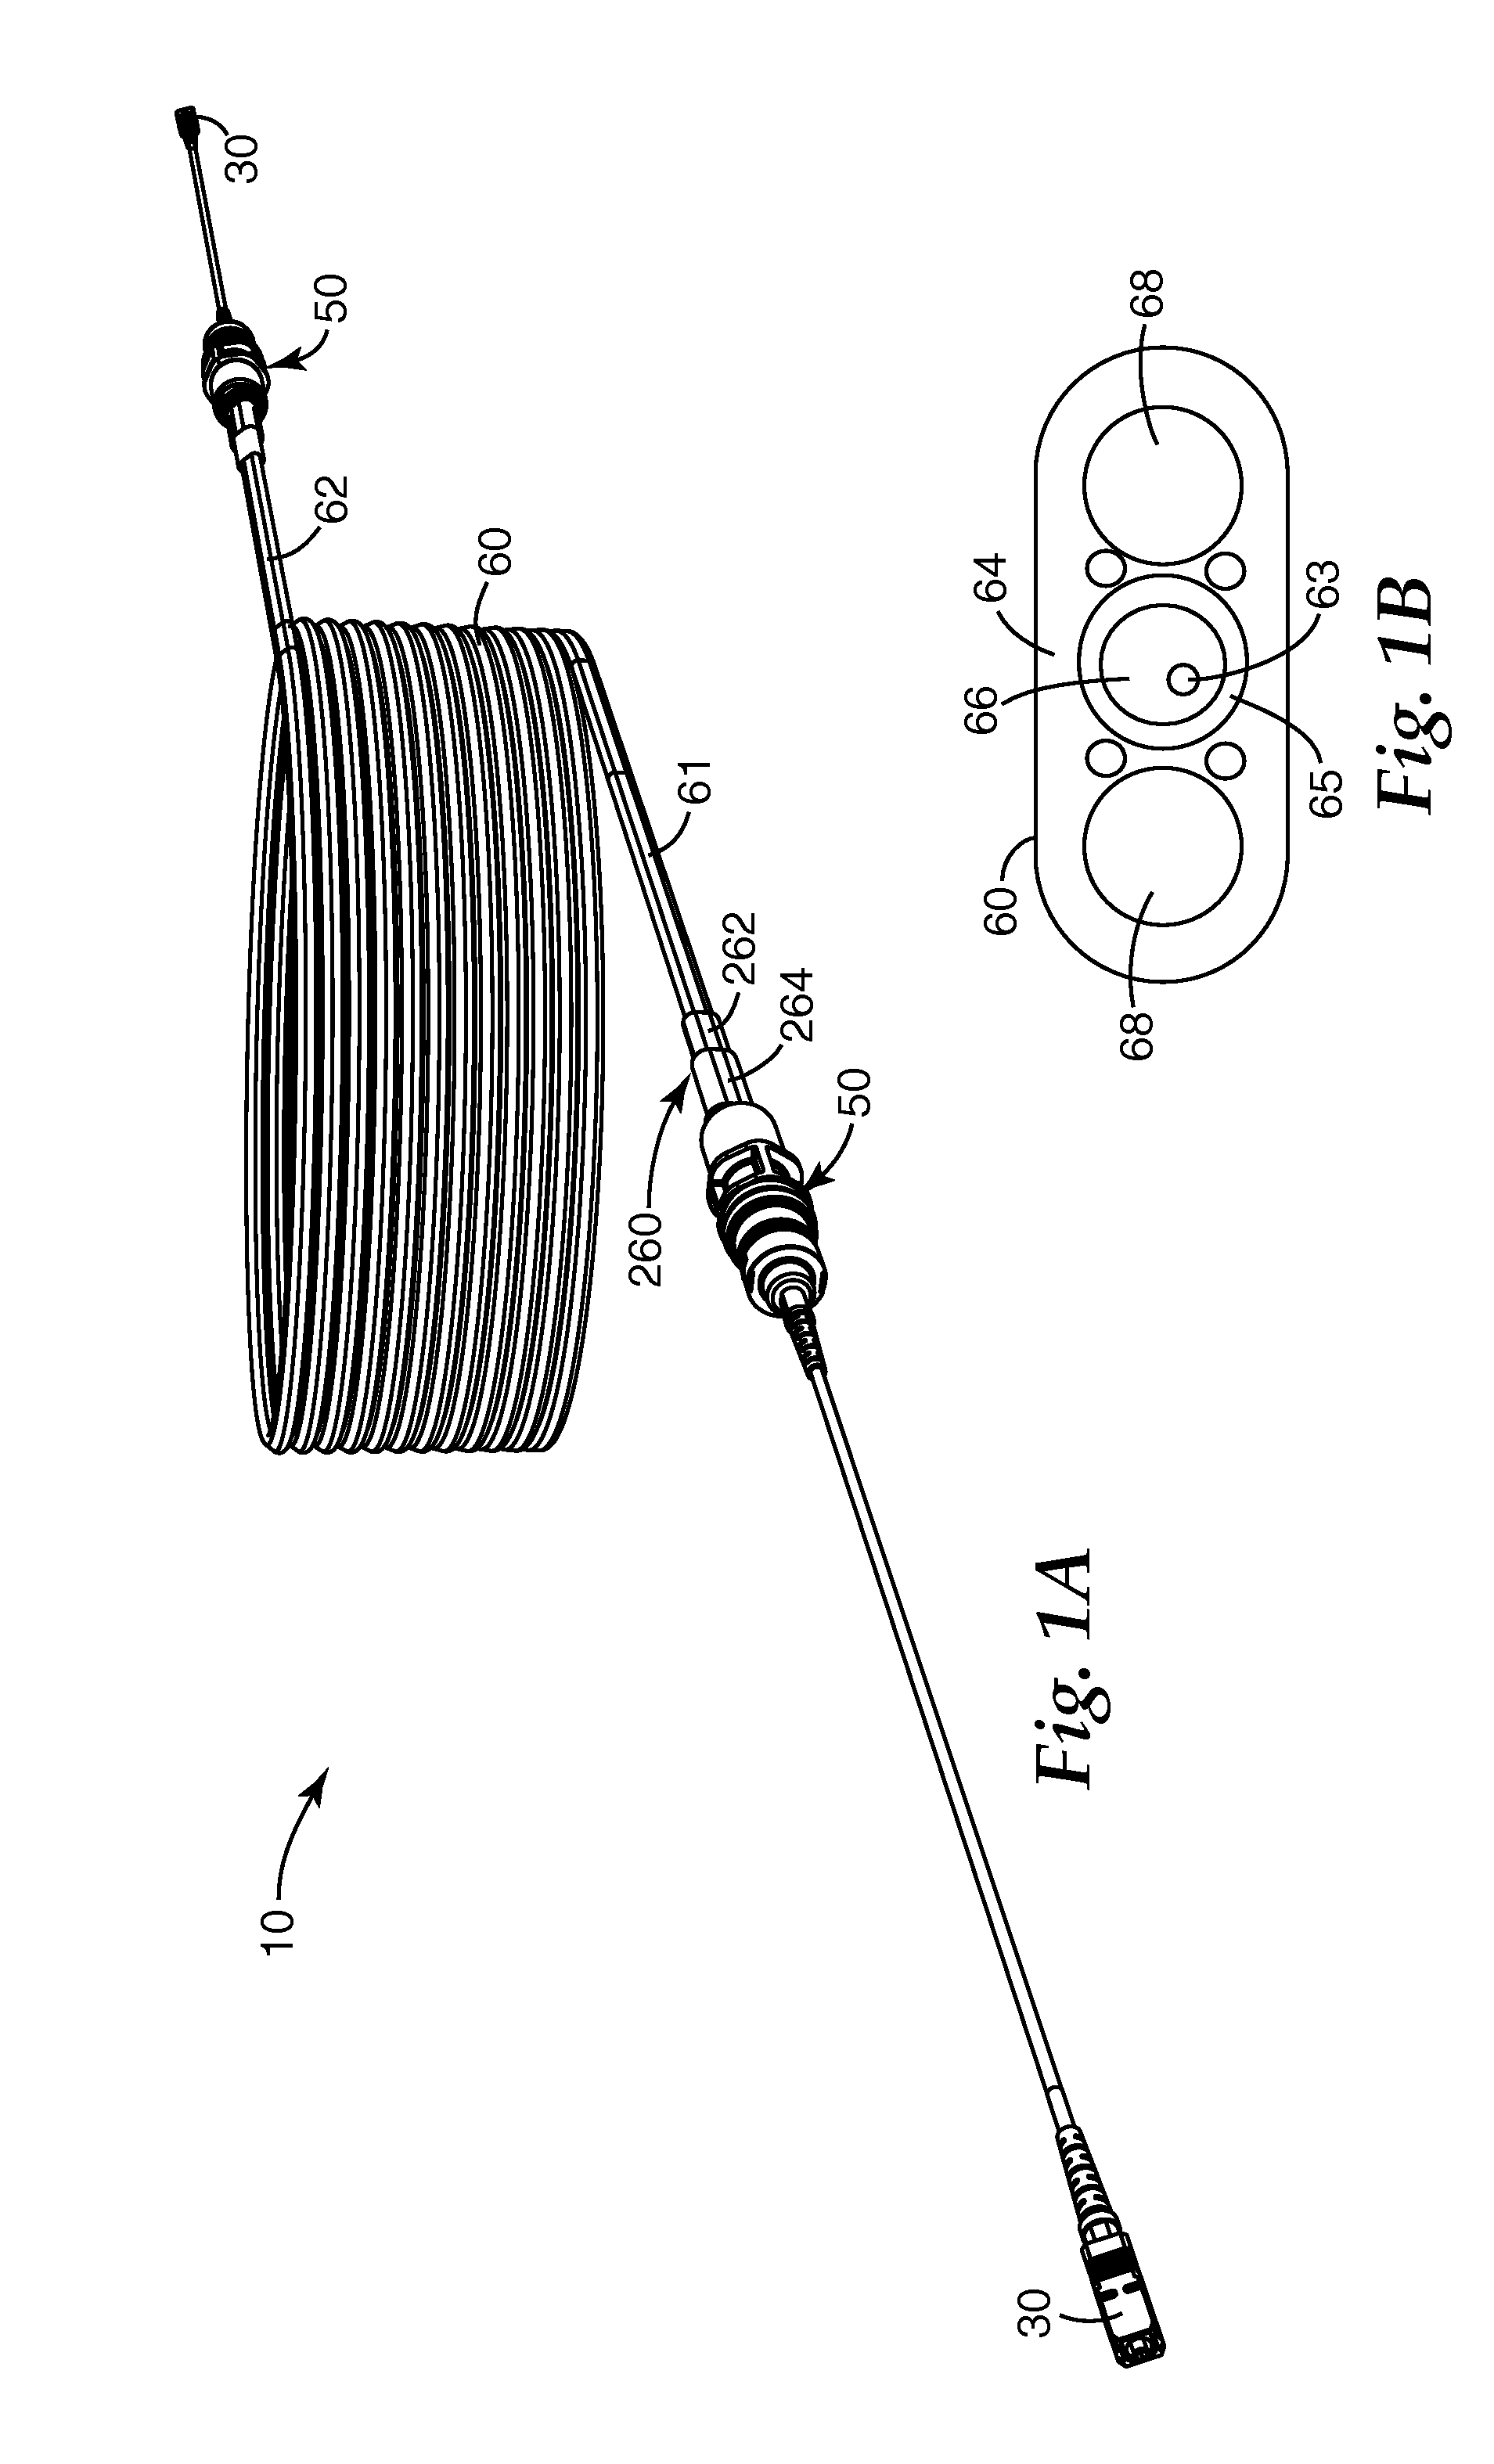 Optical fiber cable inlet device and telecommunications enclosure system